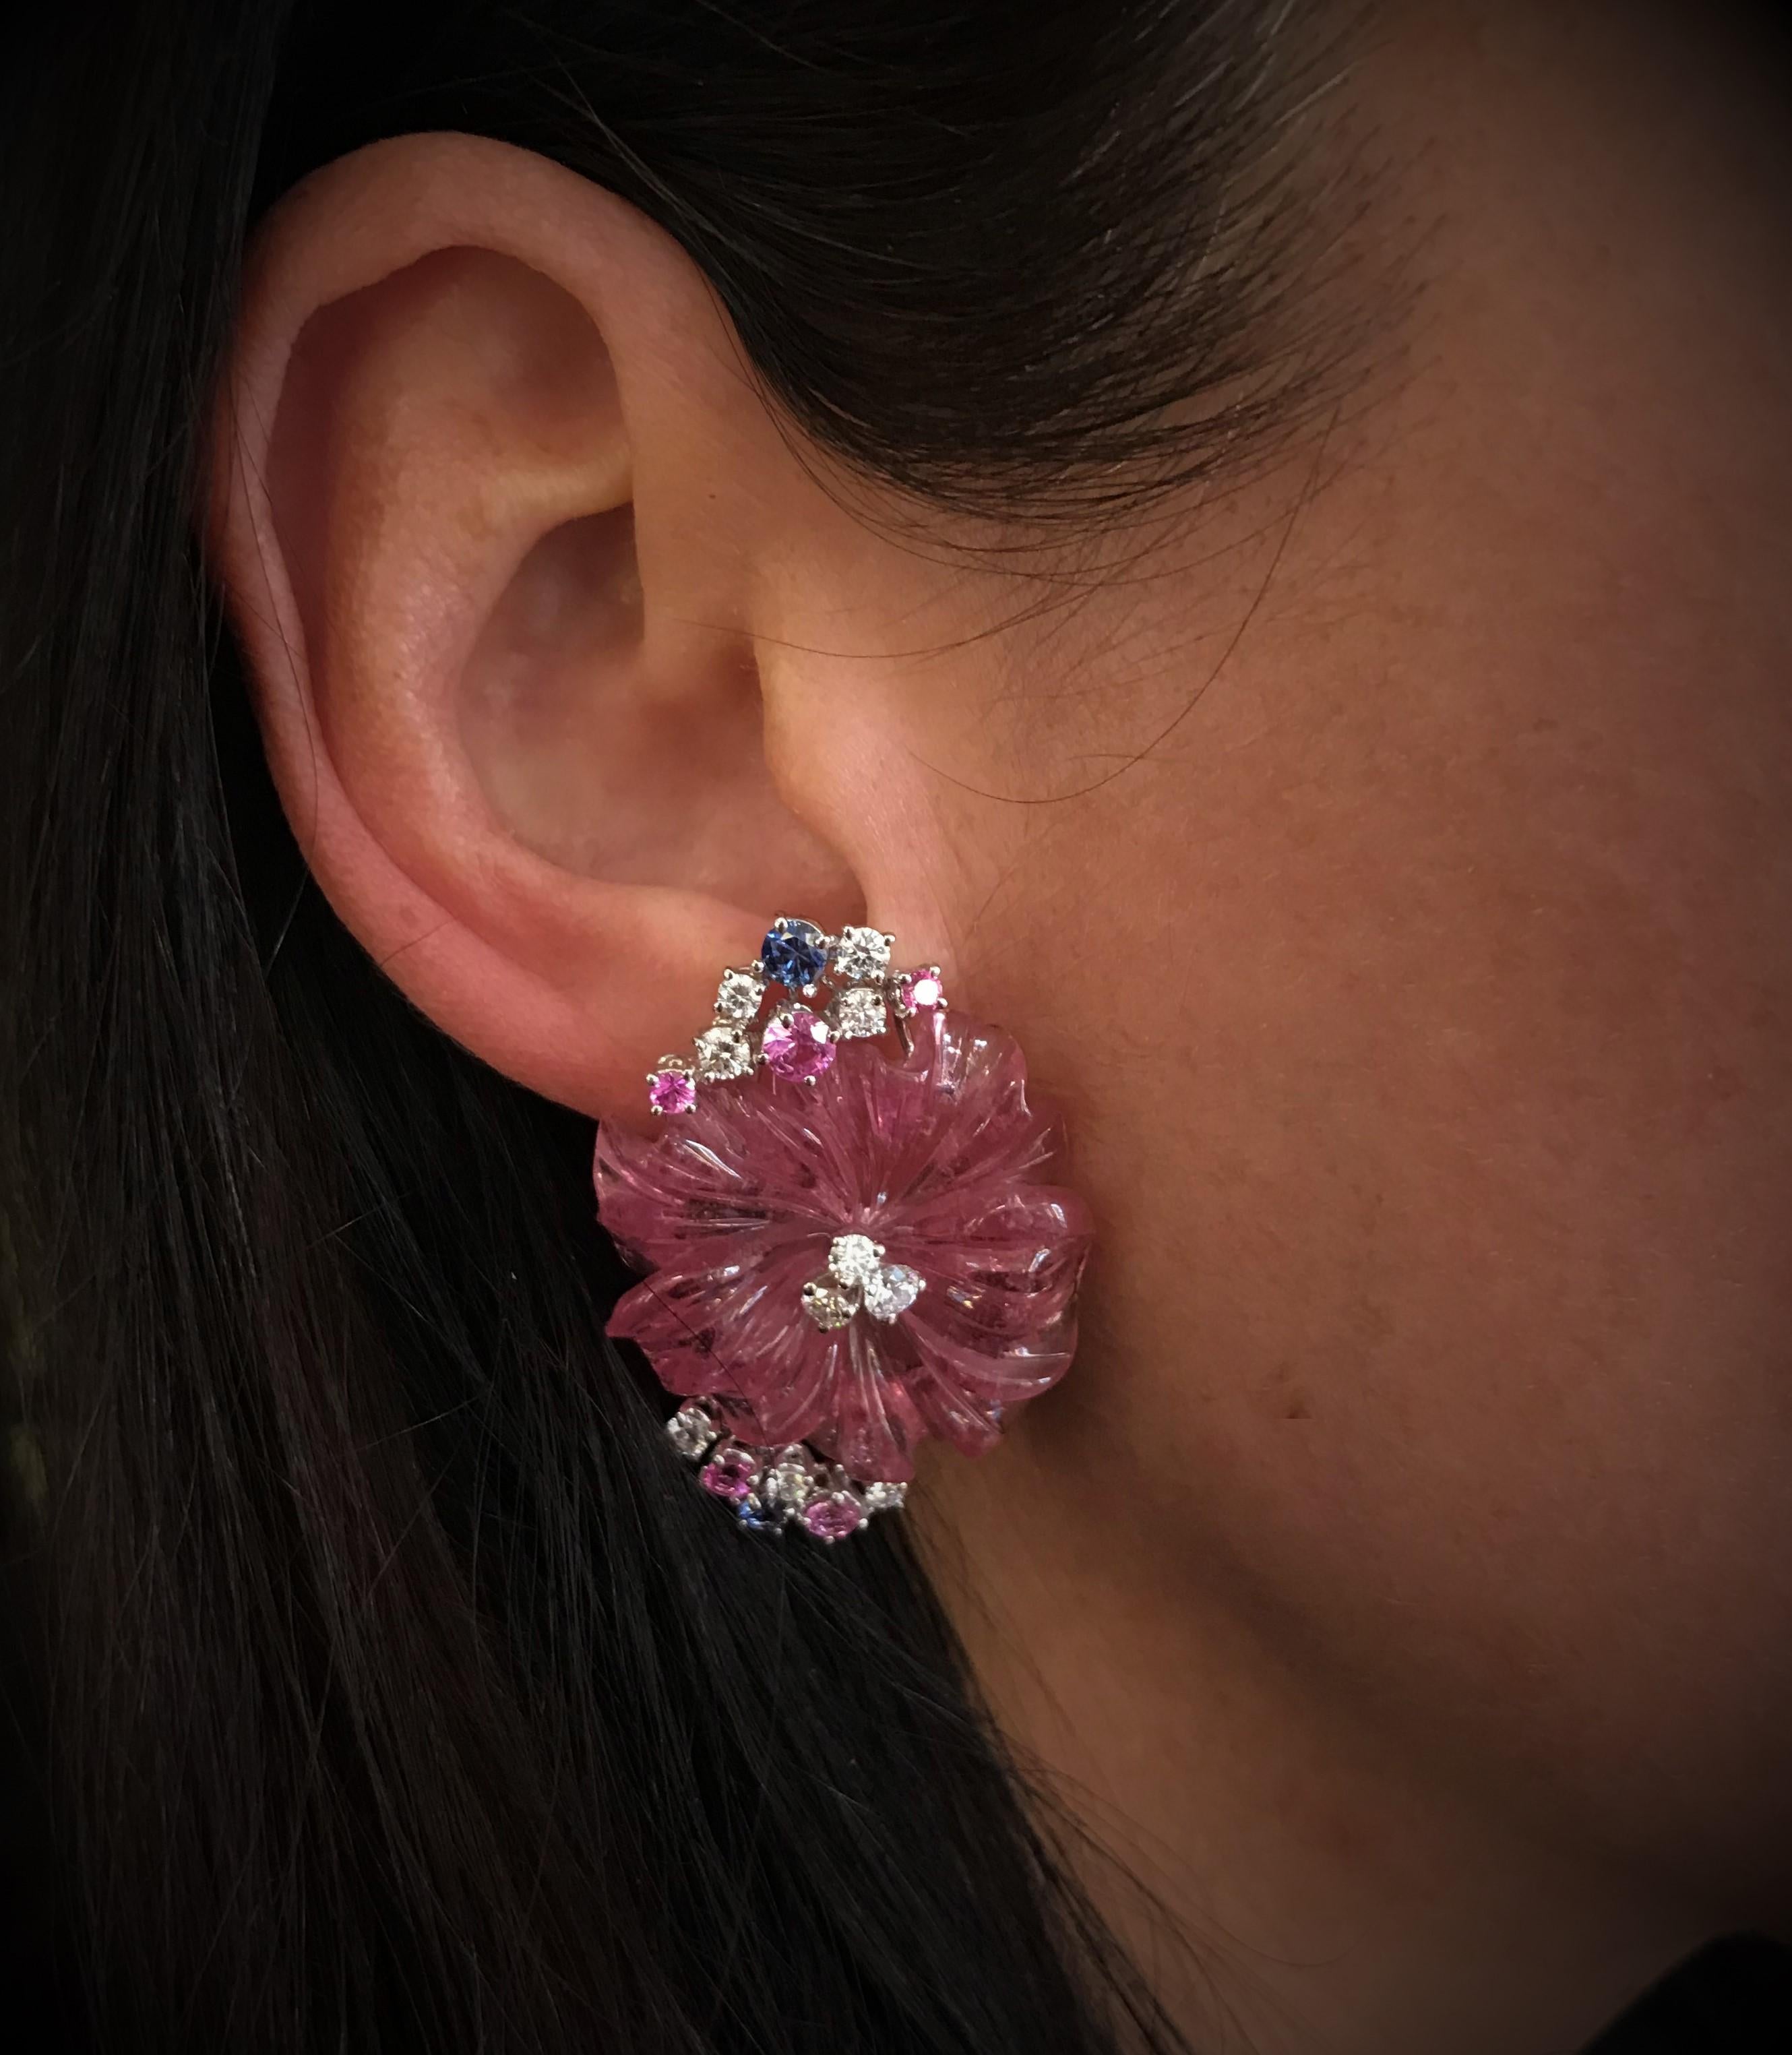 Almost a methaphysical flower for this earring realized in white gold, round brilliant cut diamonds, pink and blue sapphires and pink tourmaline flowers.

Diamonds ct 1.33
Sapphires total ct 59.32
Tourmaline ct 56.95
